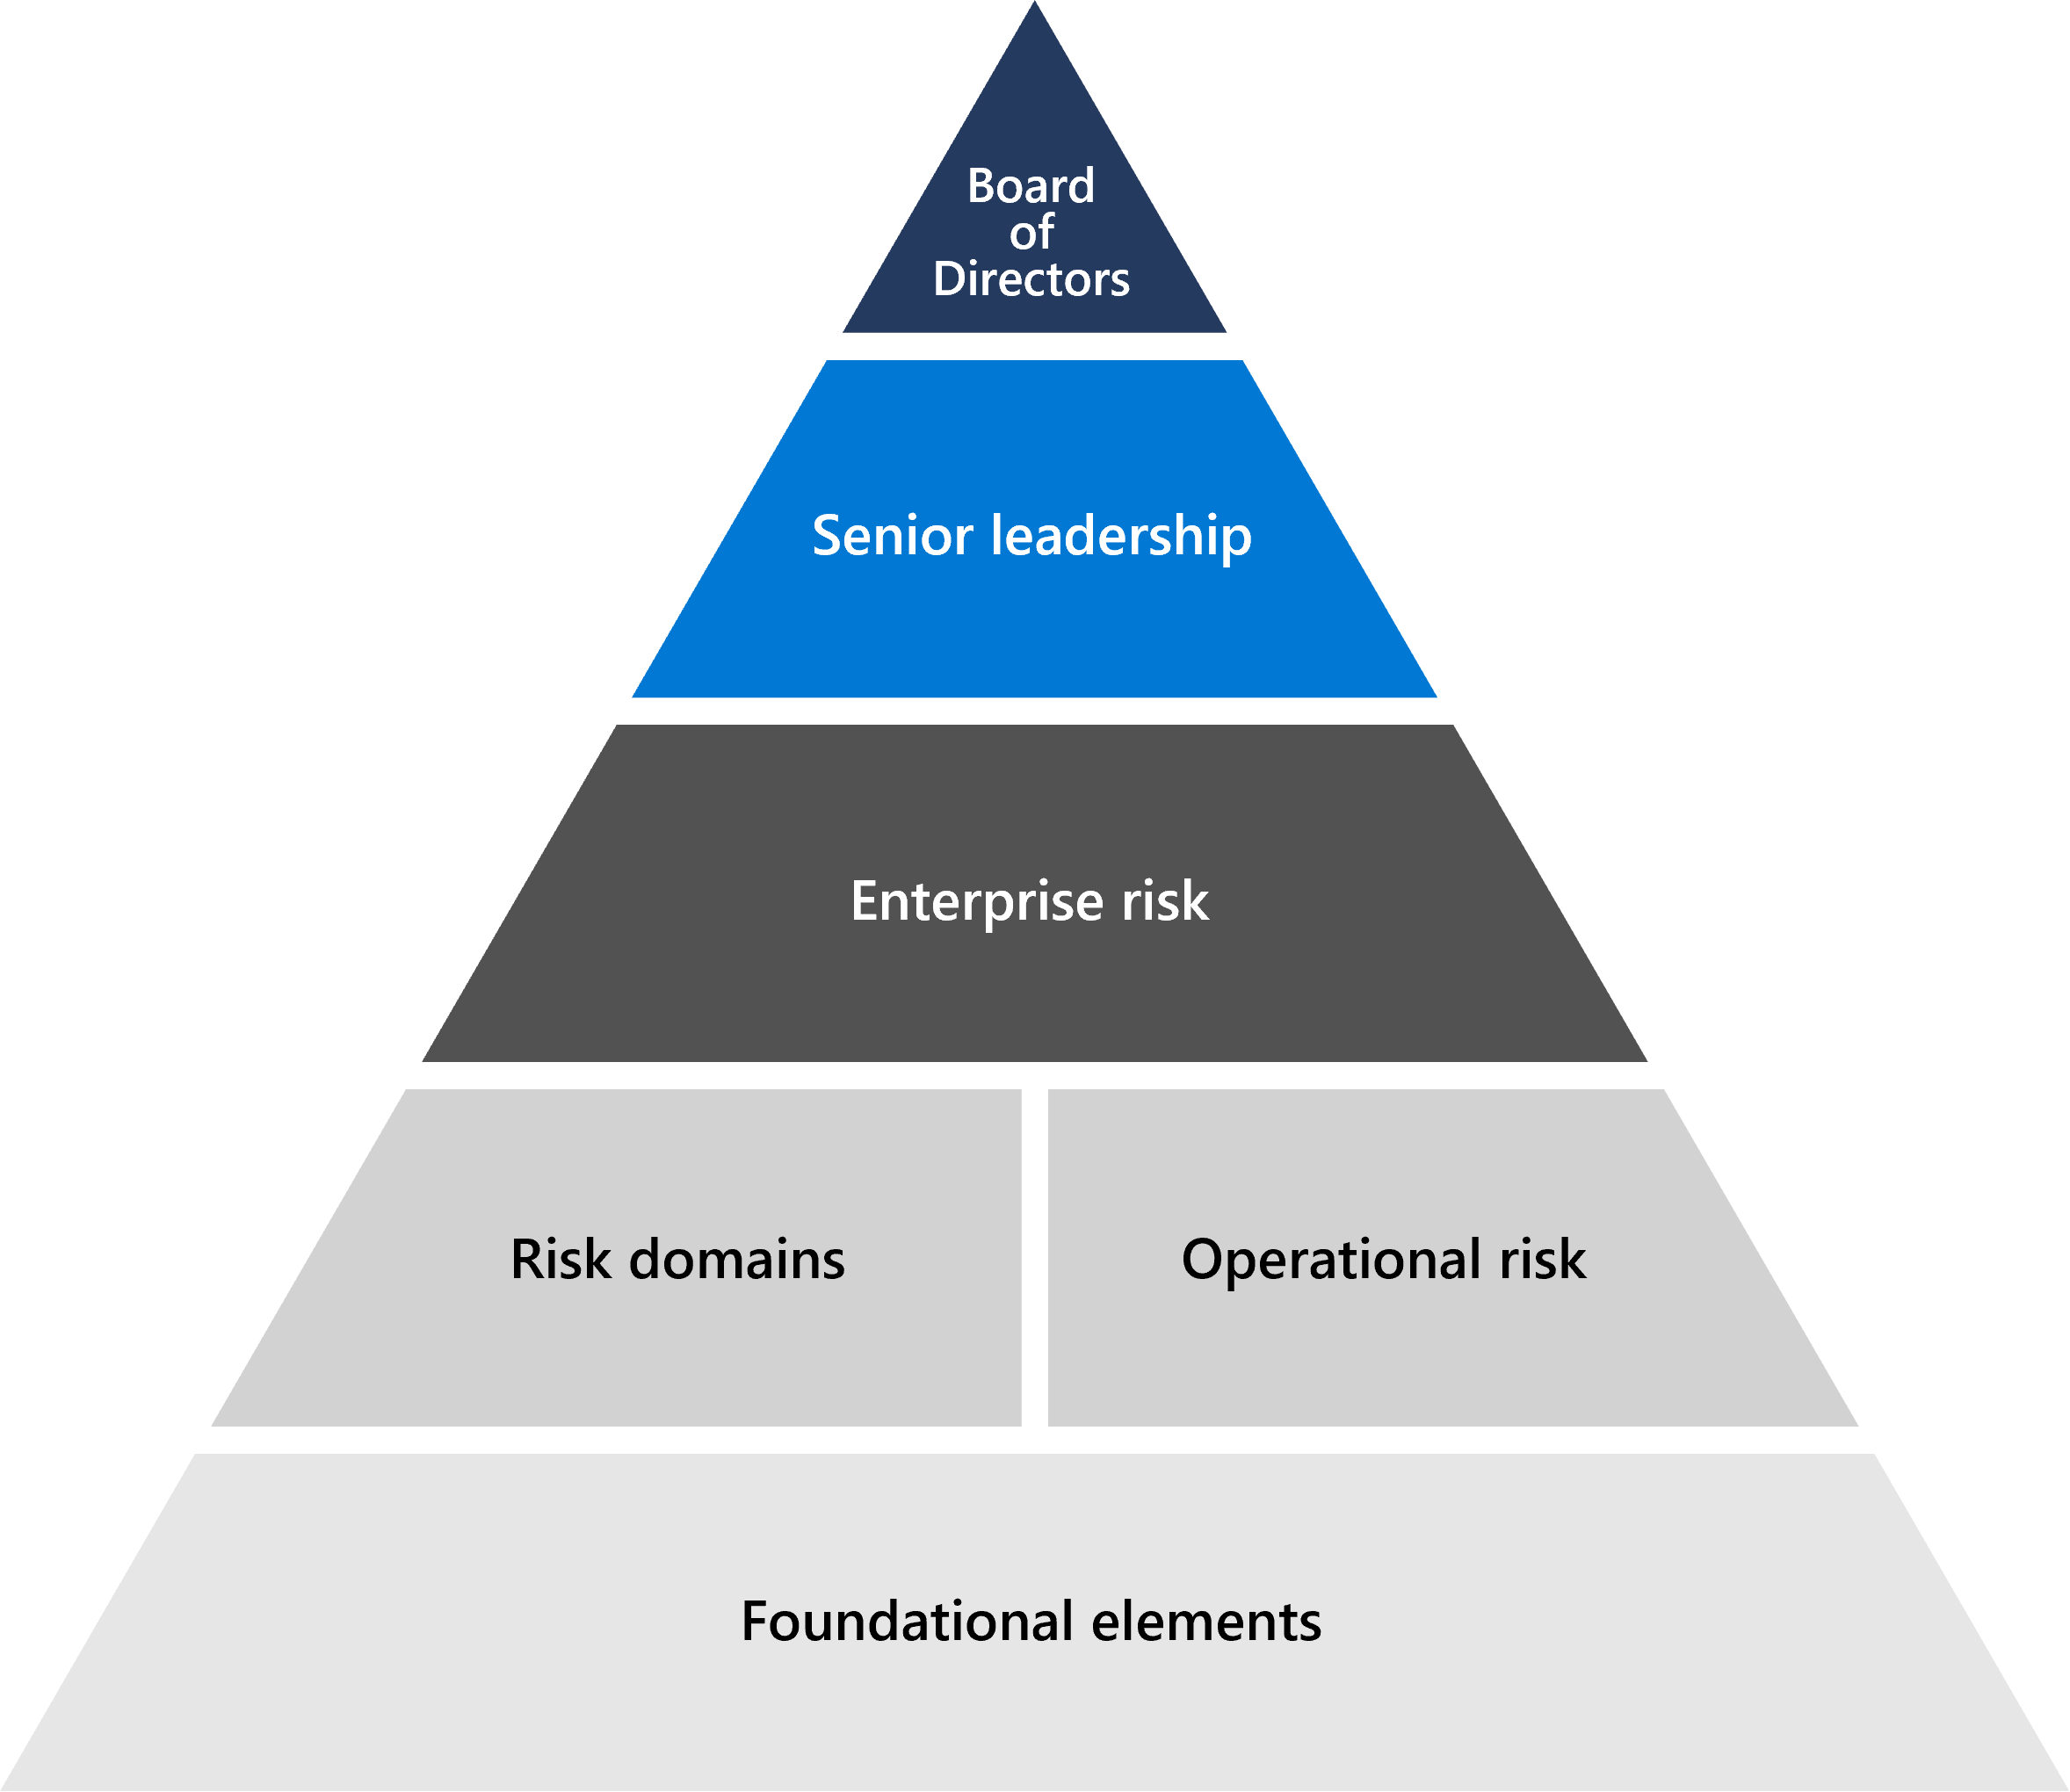 A pyramid diagram showing the foundation of Microsoft Risk Management -from the top starting with board of directors, senior leadership, enterprise risk. The line below is risk domains and operational domains and the bottom of triangle is foundational elements which consist of listening systems, methodology, and tools